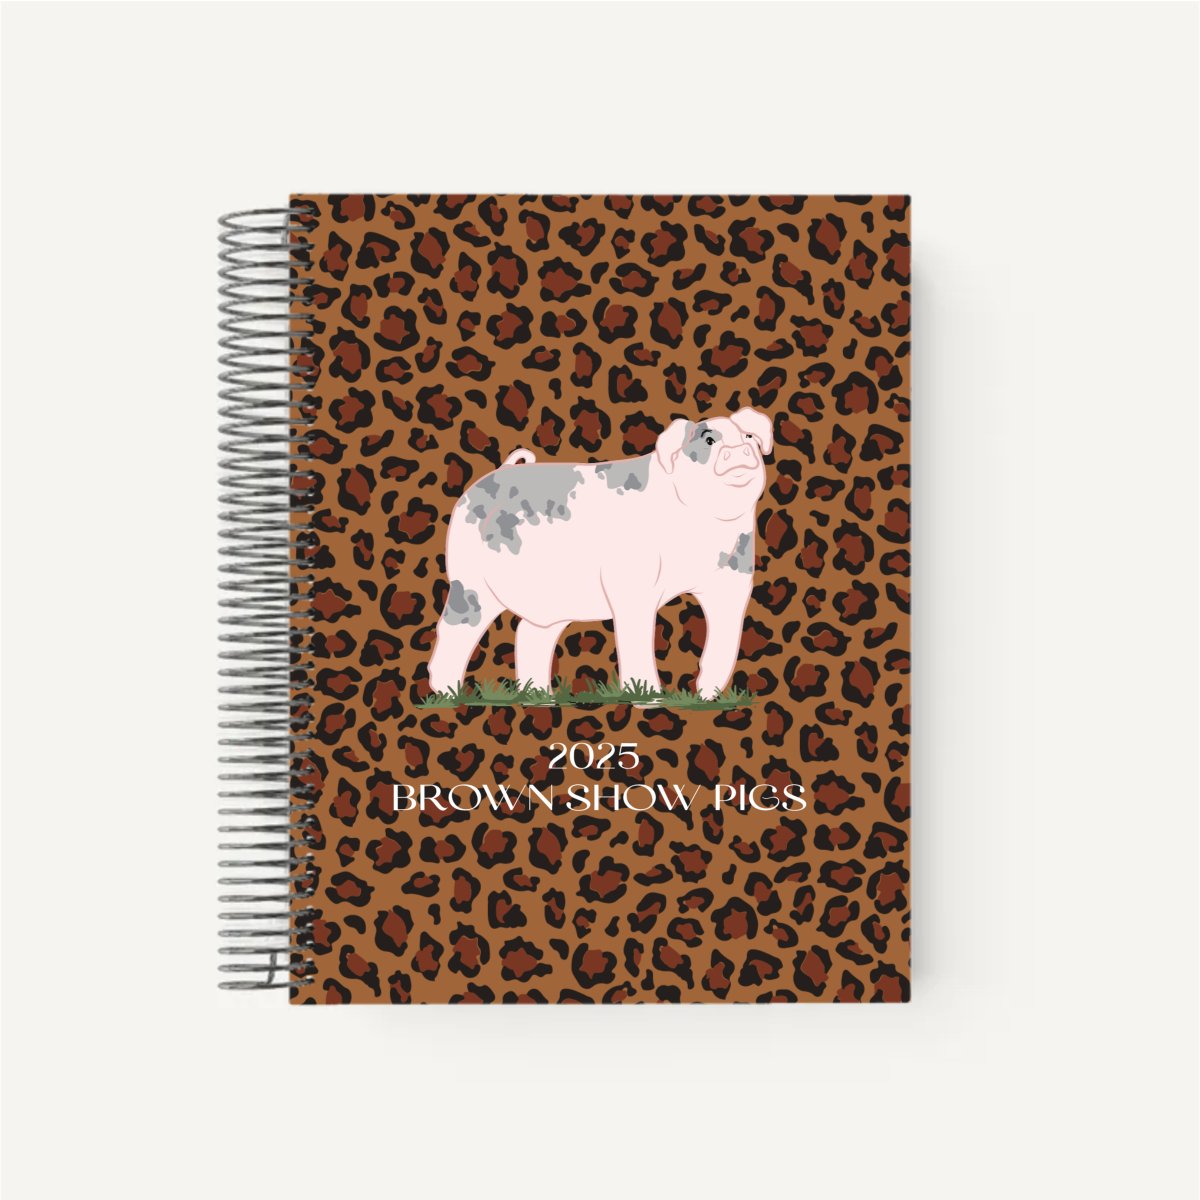 Personalized-Livestock-Farrowing Record Planner - Cheetah Cover